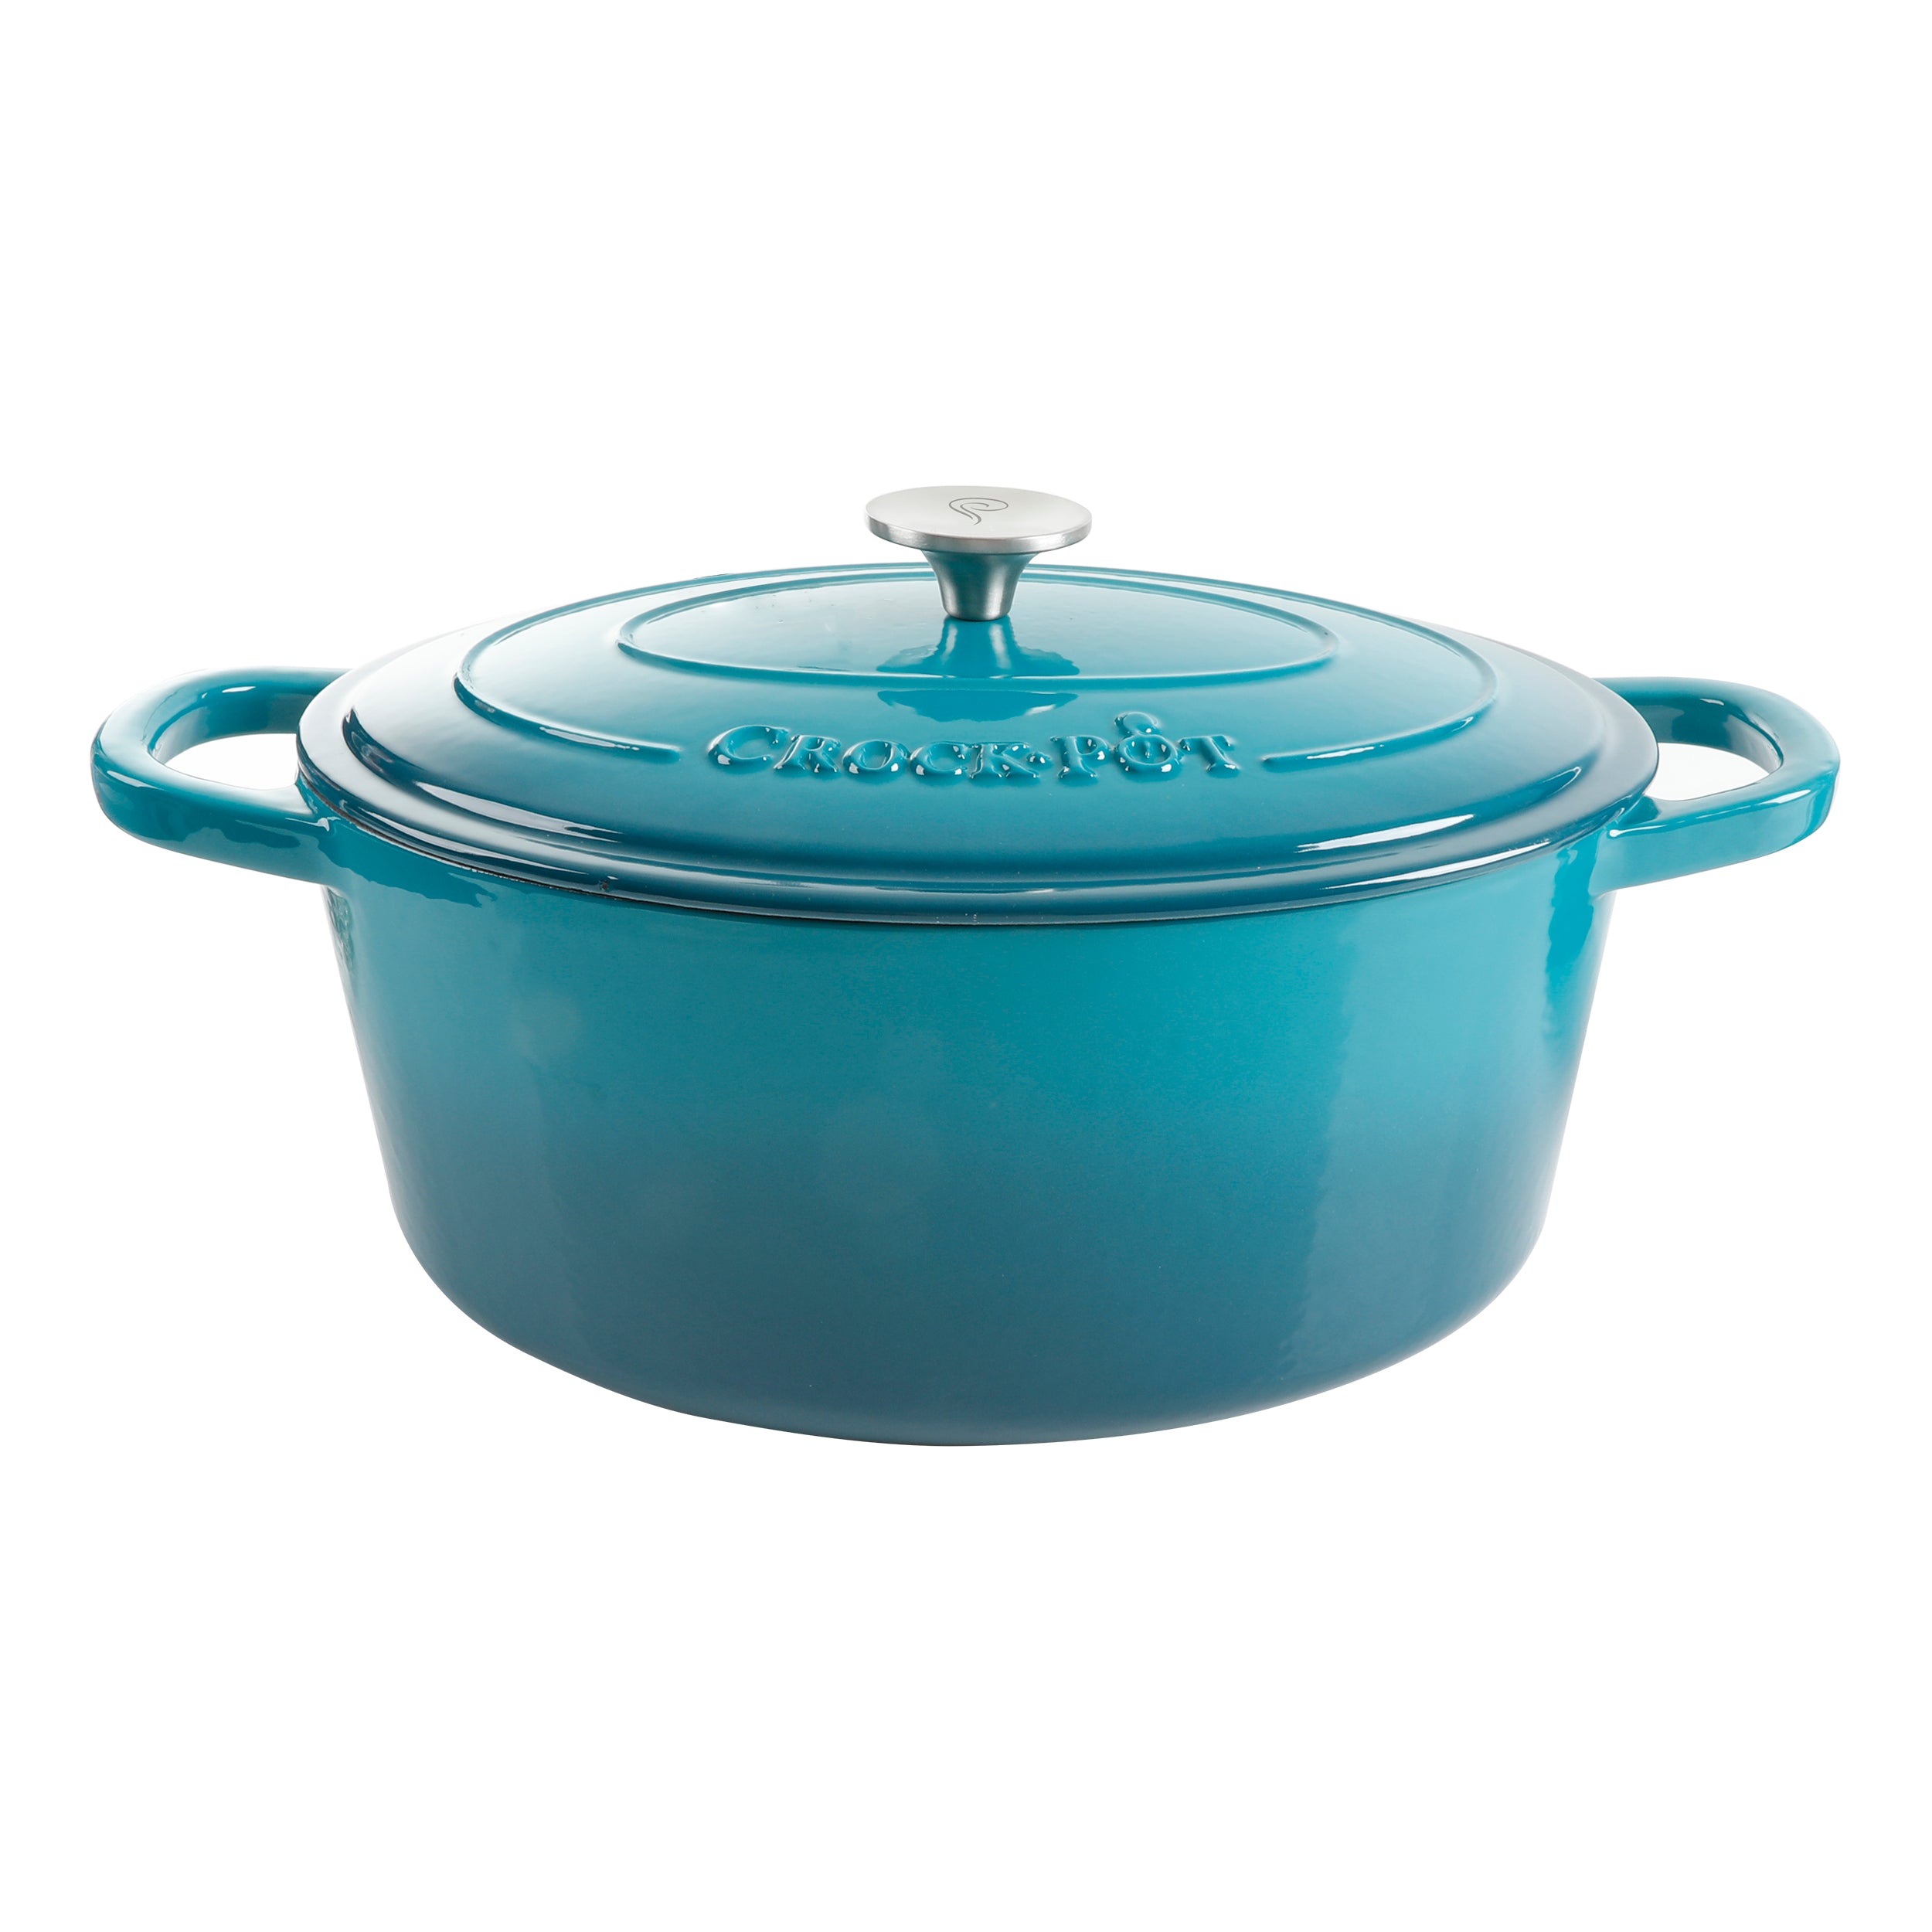 Elite 2-Quart Turquoise Oval Slow Cooker at